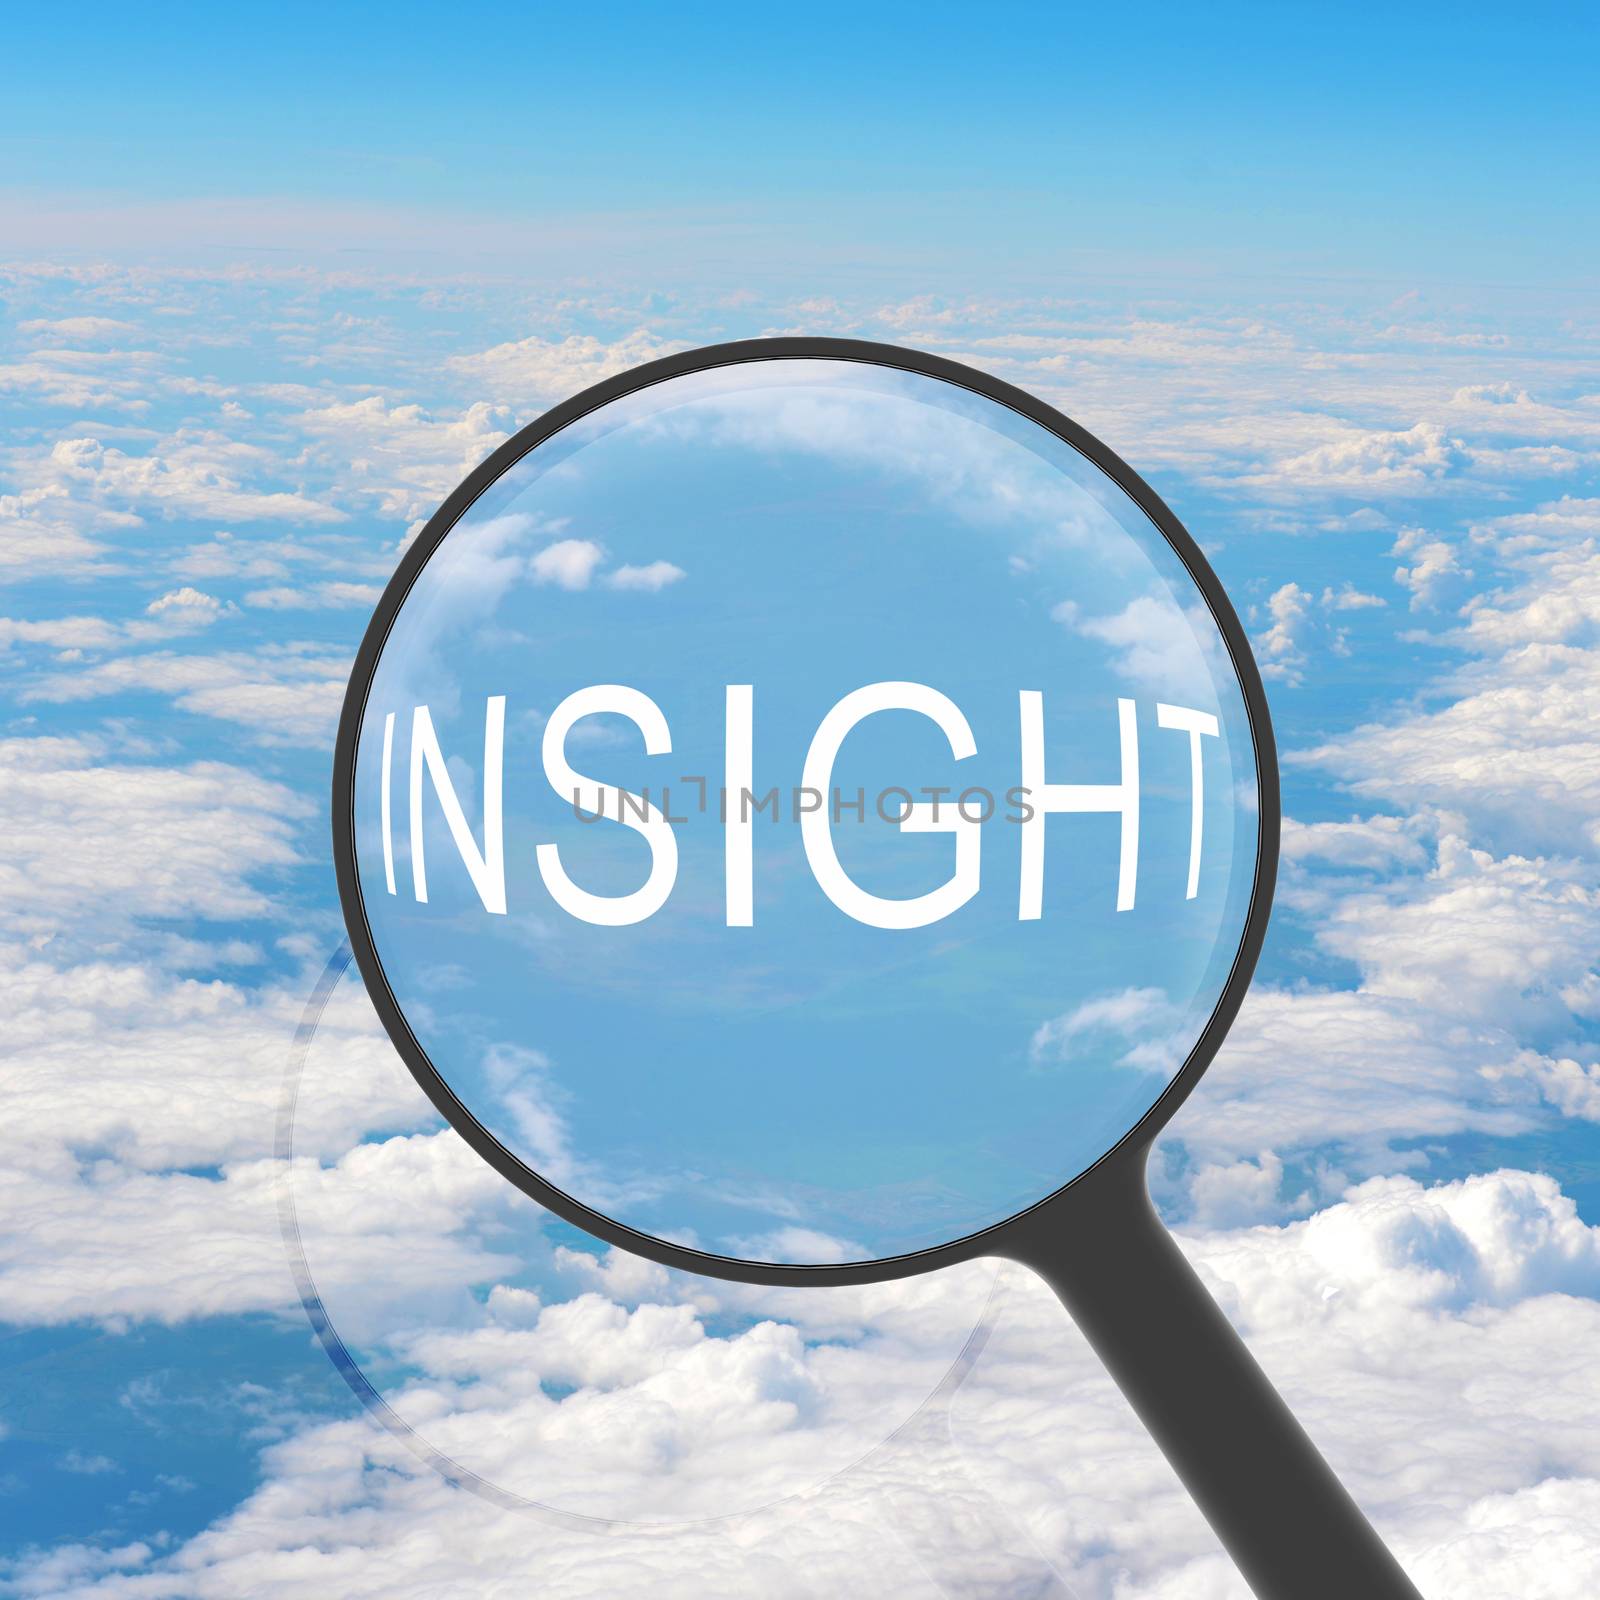 Magnifying glass looking INSIGHT. Clouds on background. Business concept